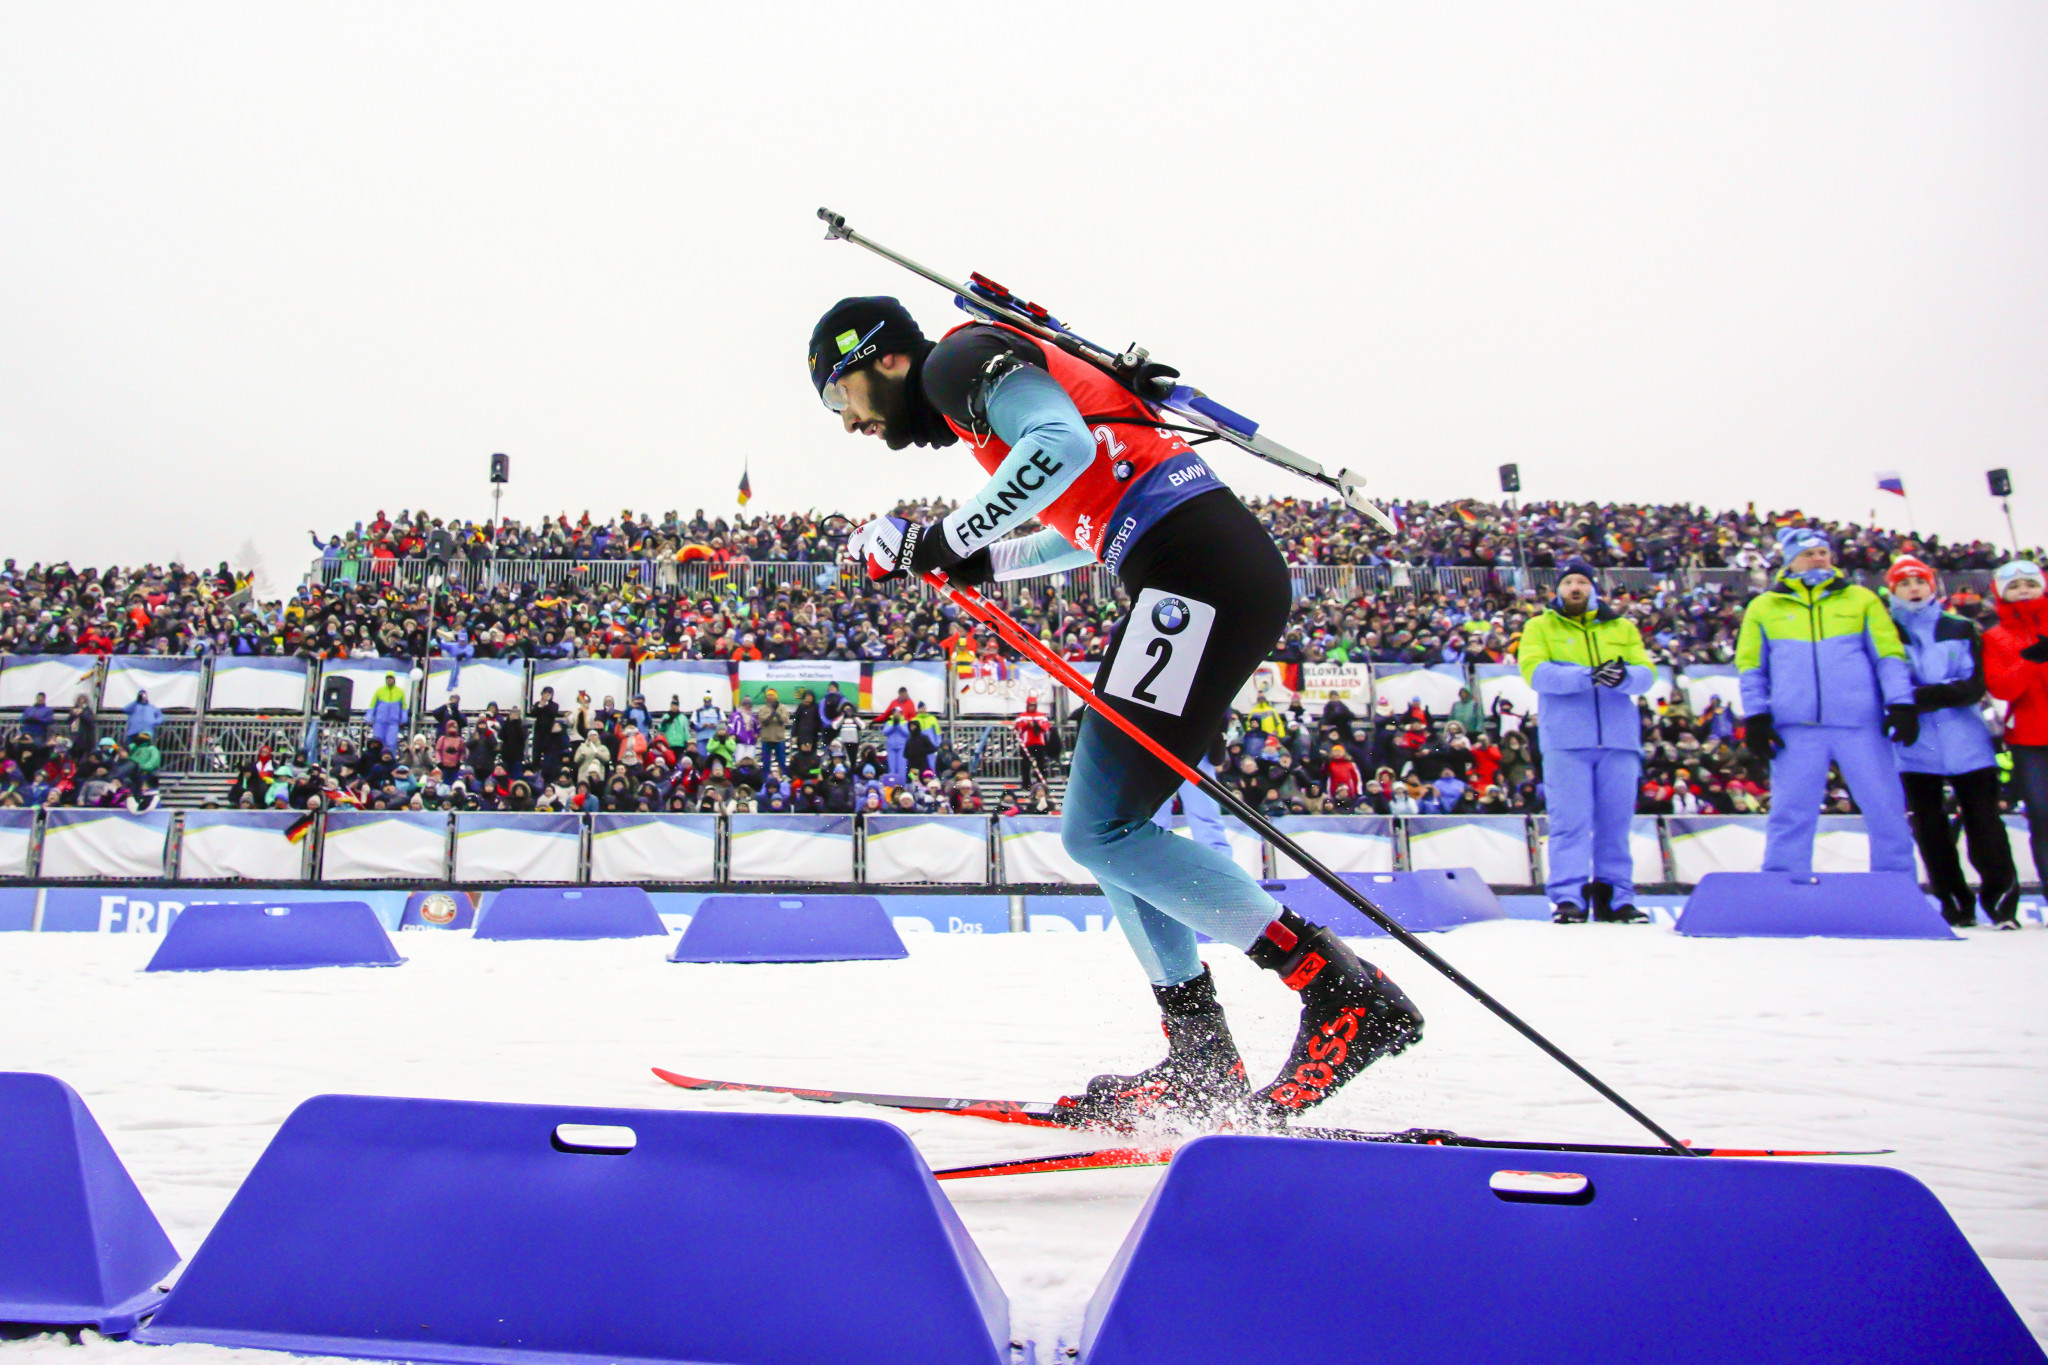 Martin Fourcade will have the chance to extend his advantage over rival Johannes Thingnes Bø ©Getty Images